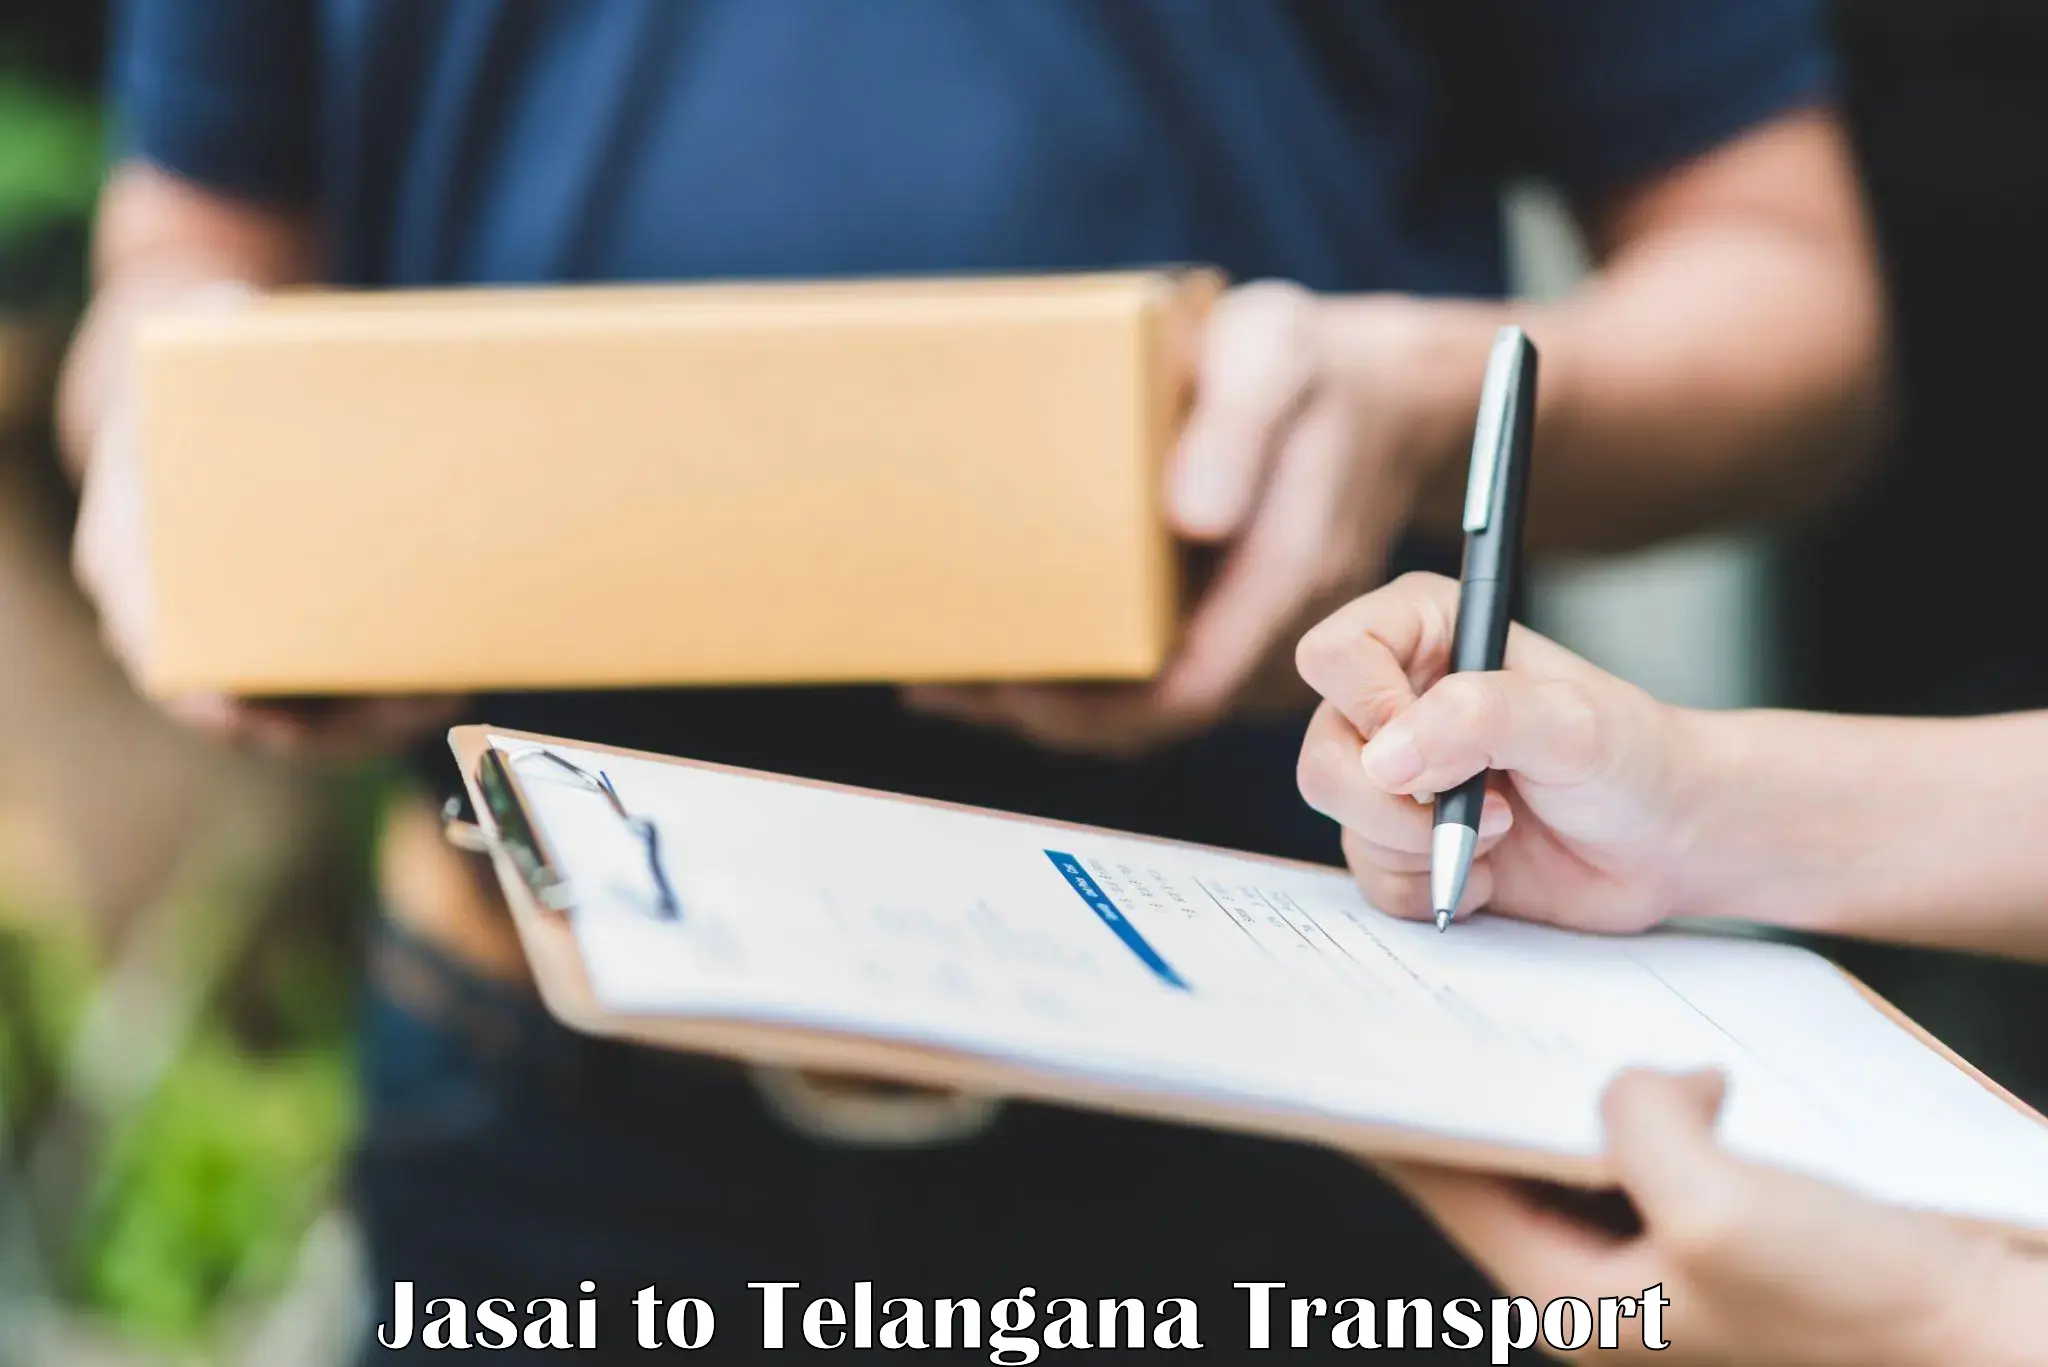 Container transport service Jasai to Alair